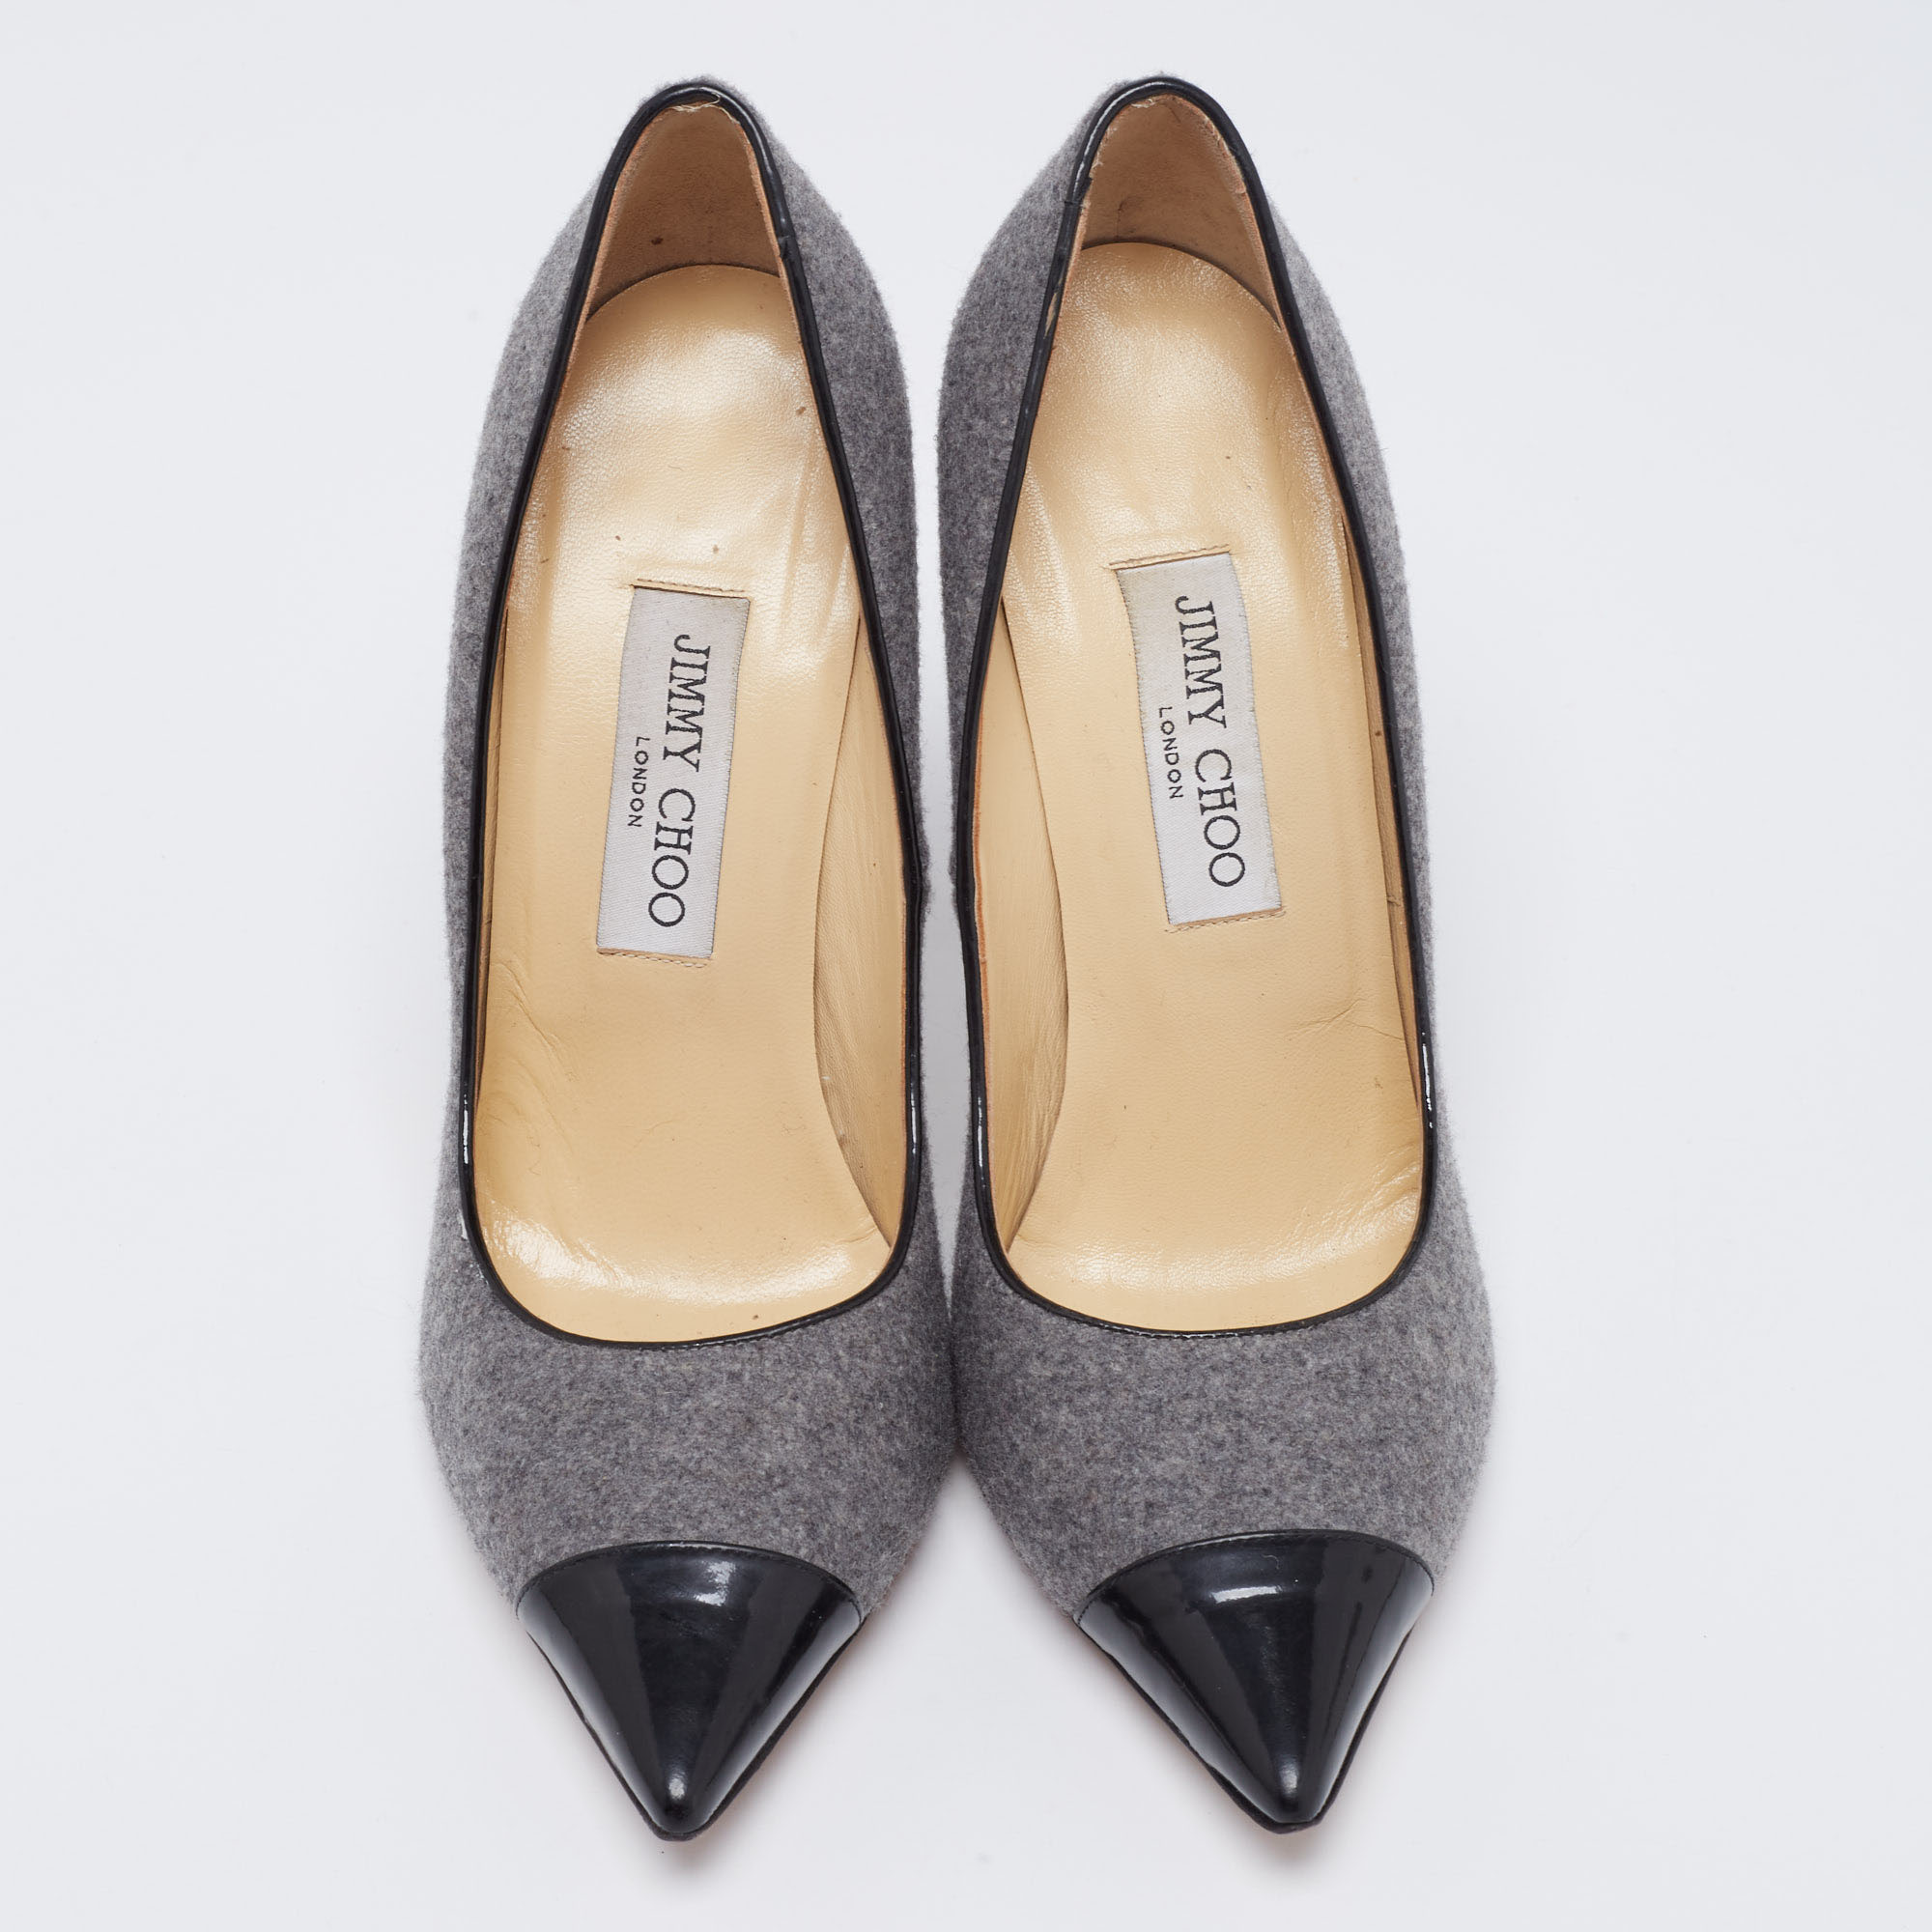 Jimmy Choo Grey/Black Wool And Patent Leather Pumps Size 39.5